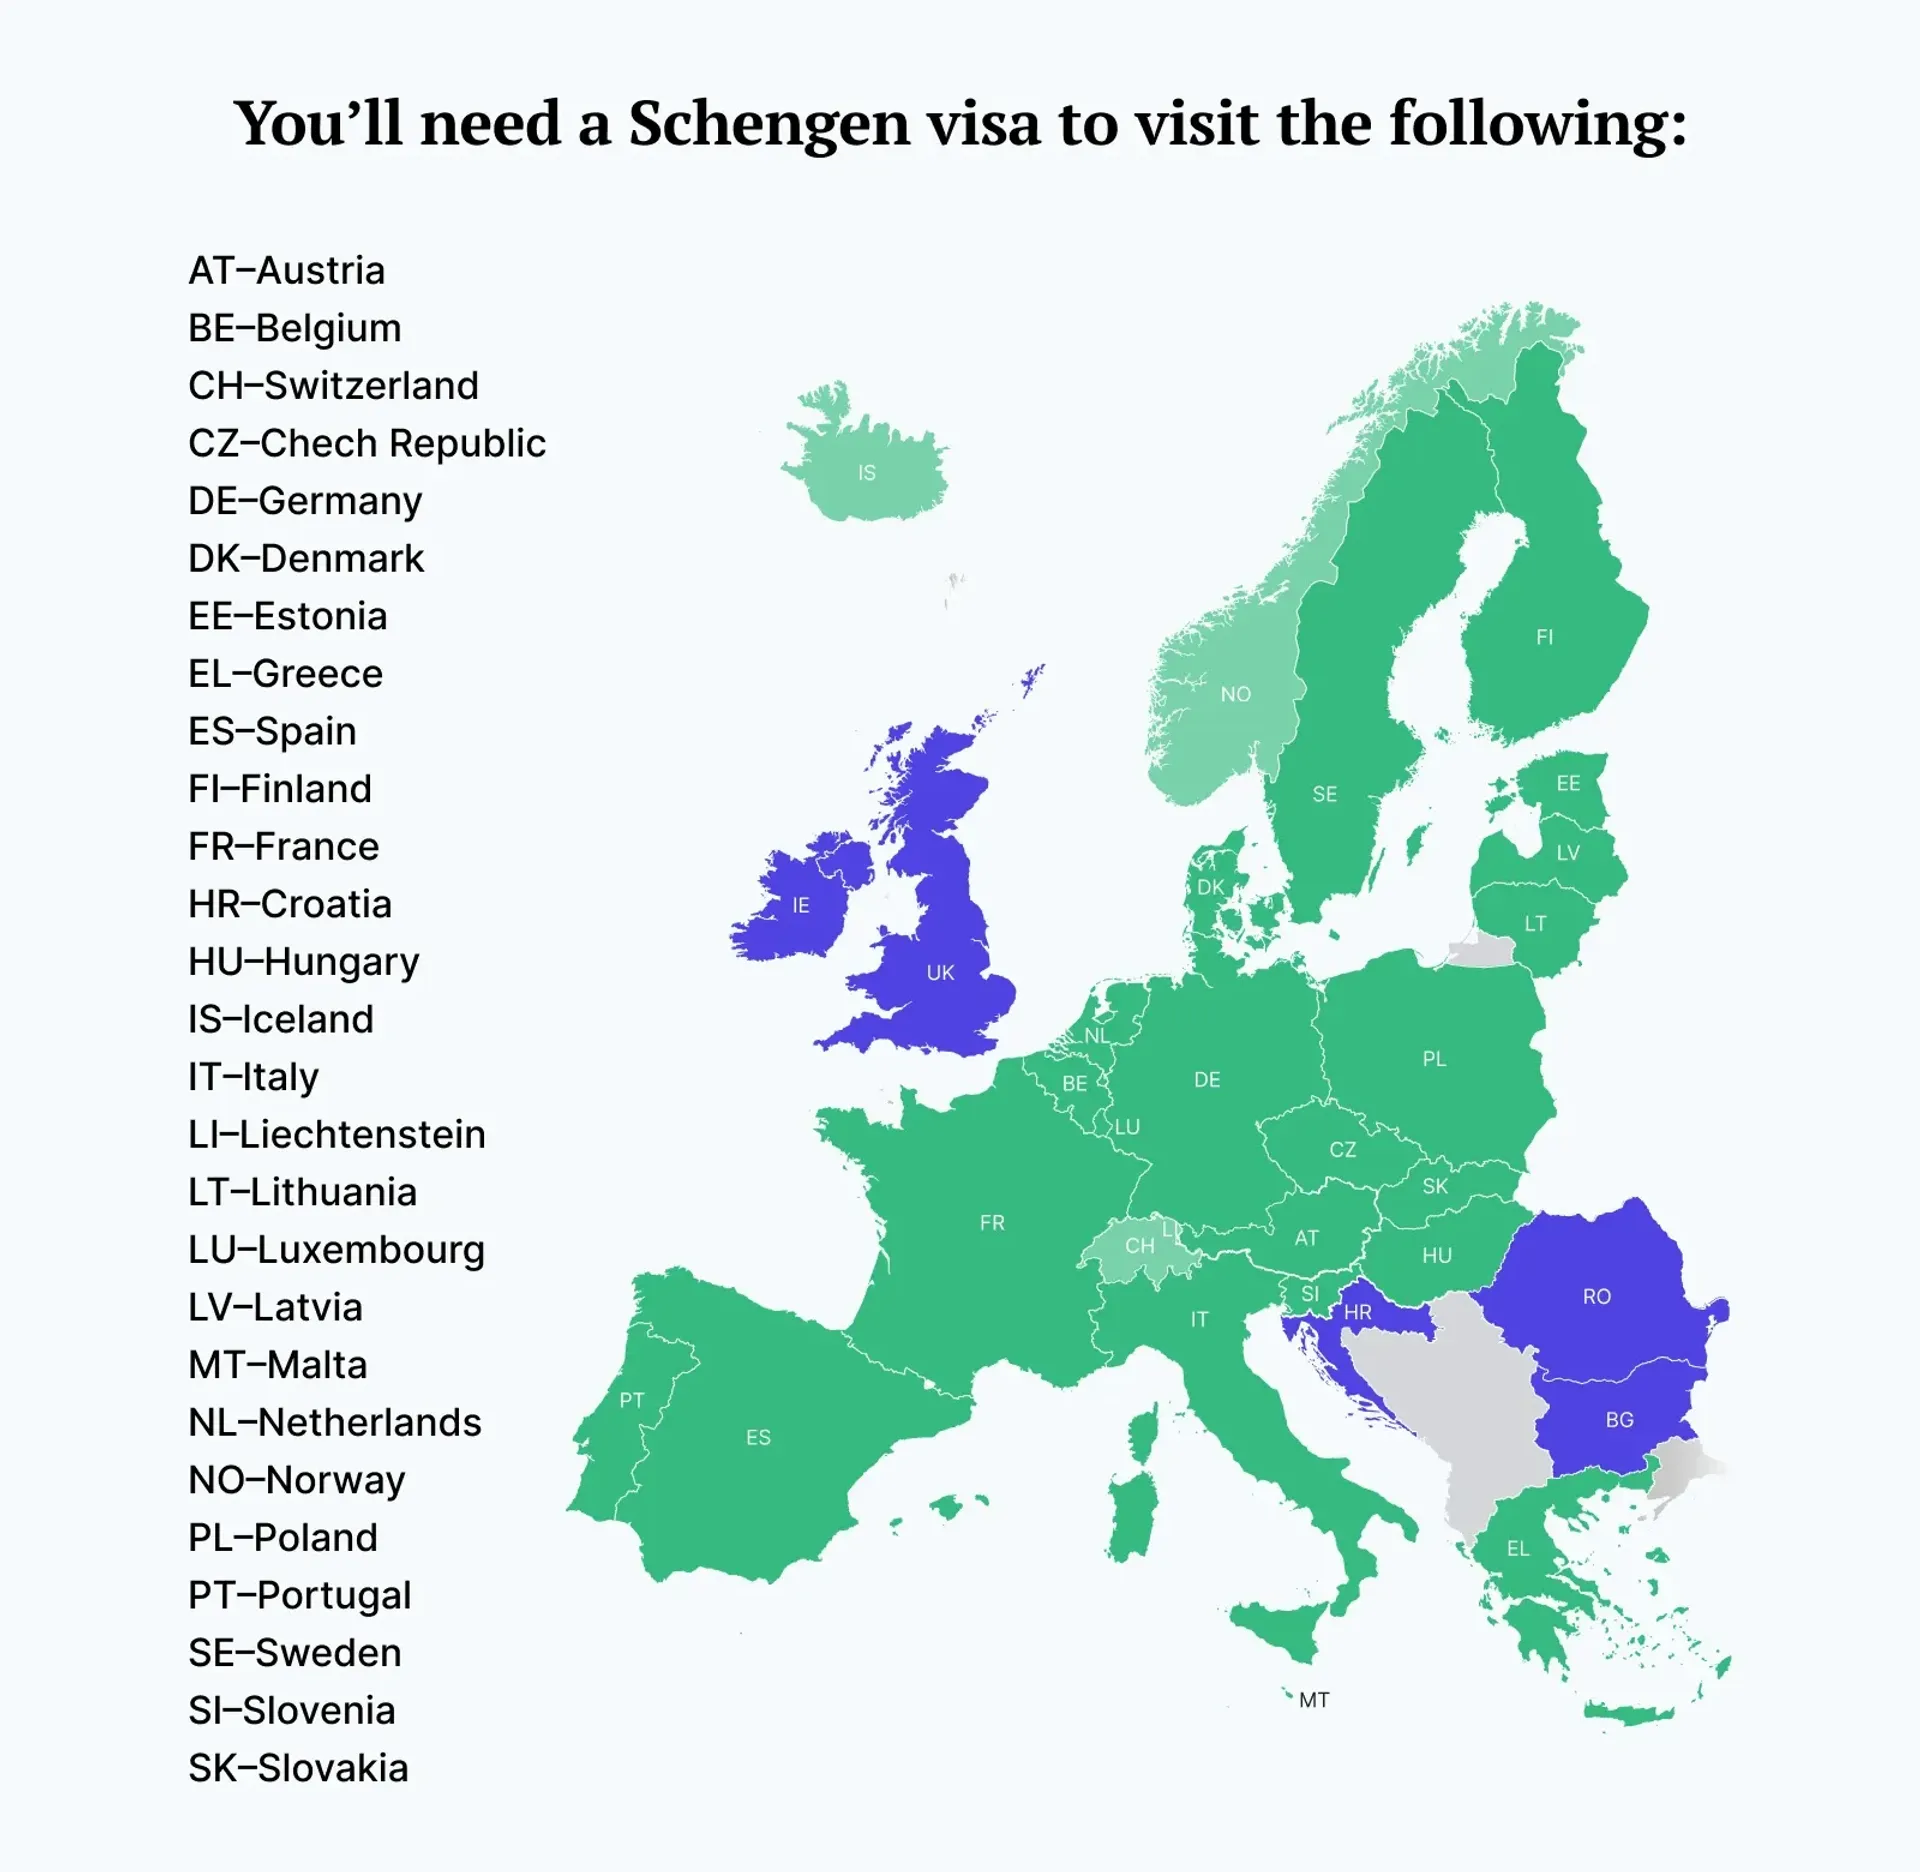 A map of countries that require you to present a Schengen visa upon entry.